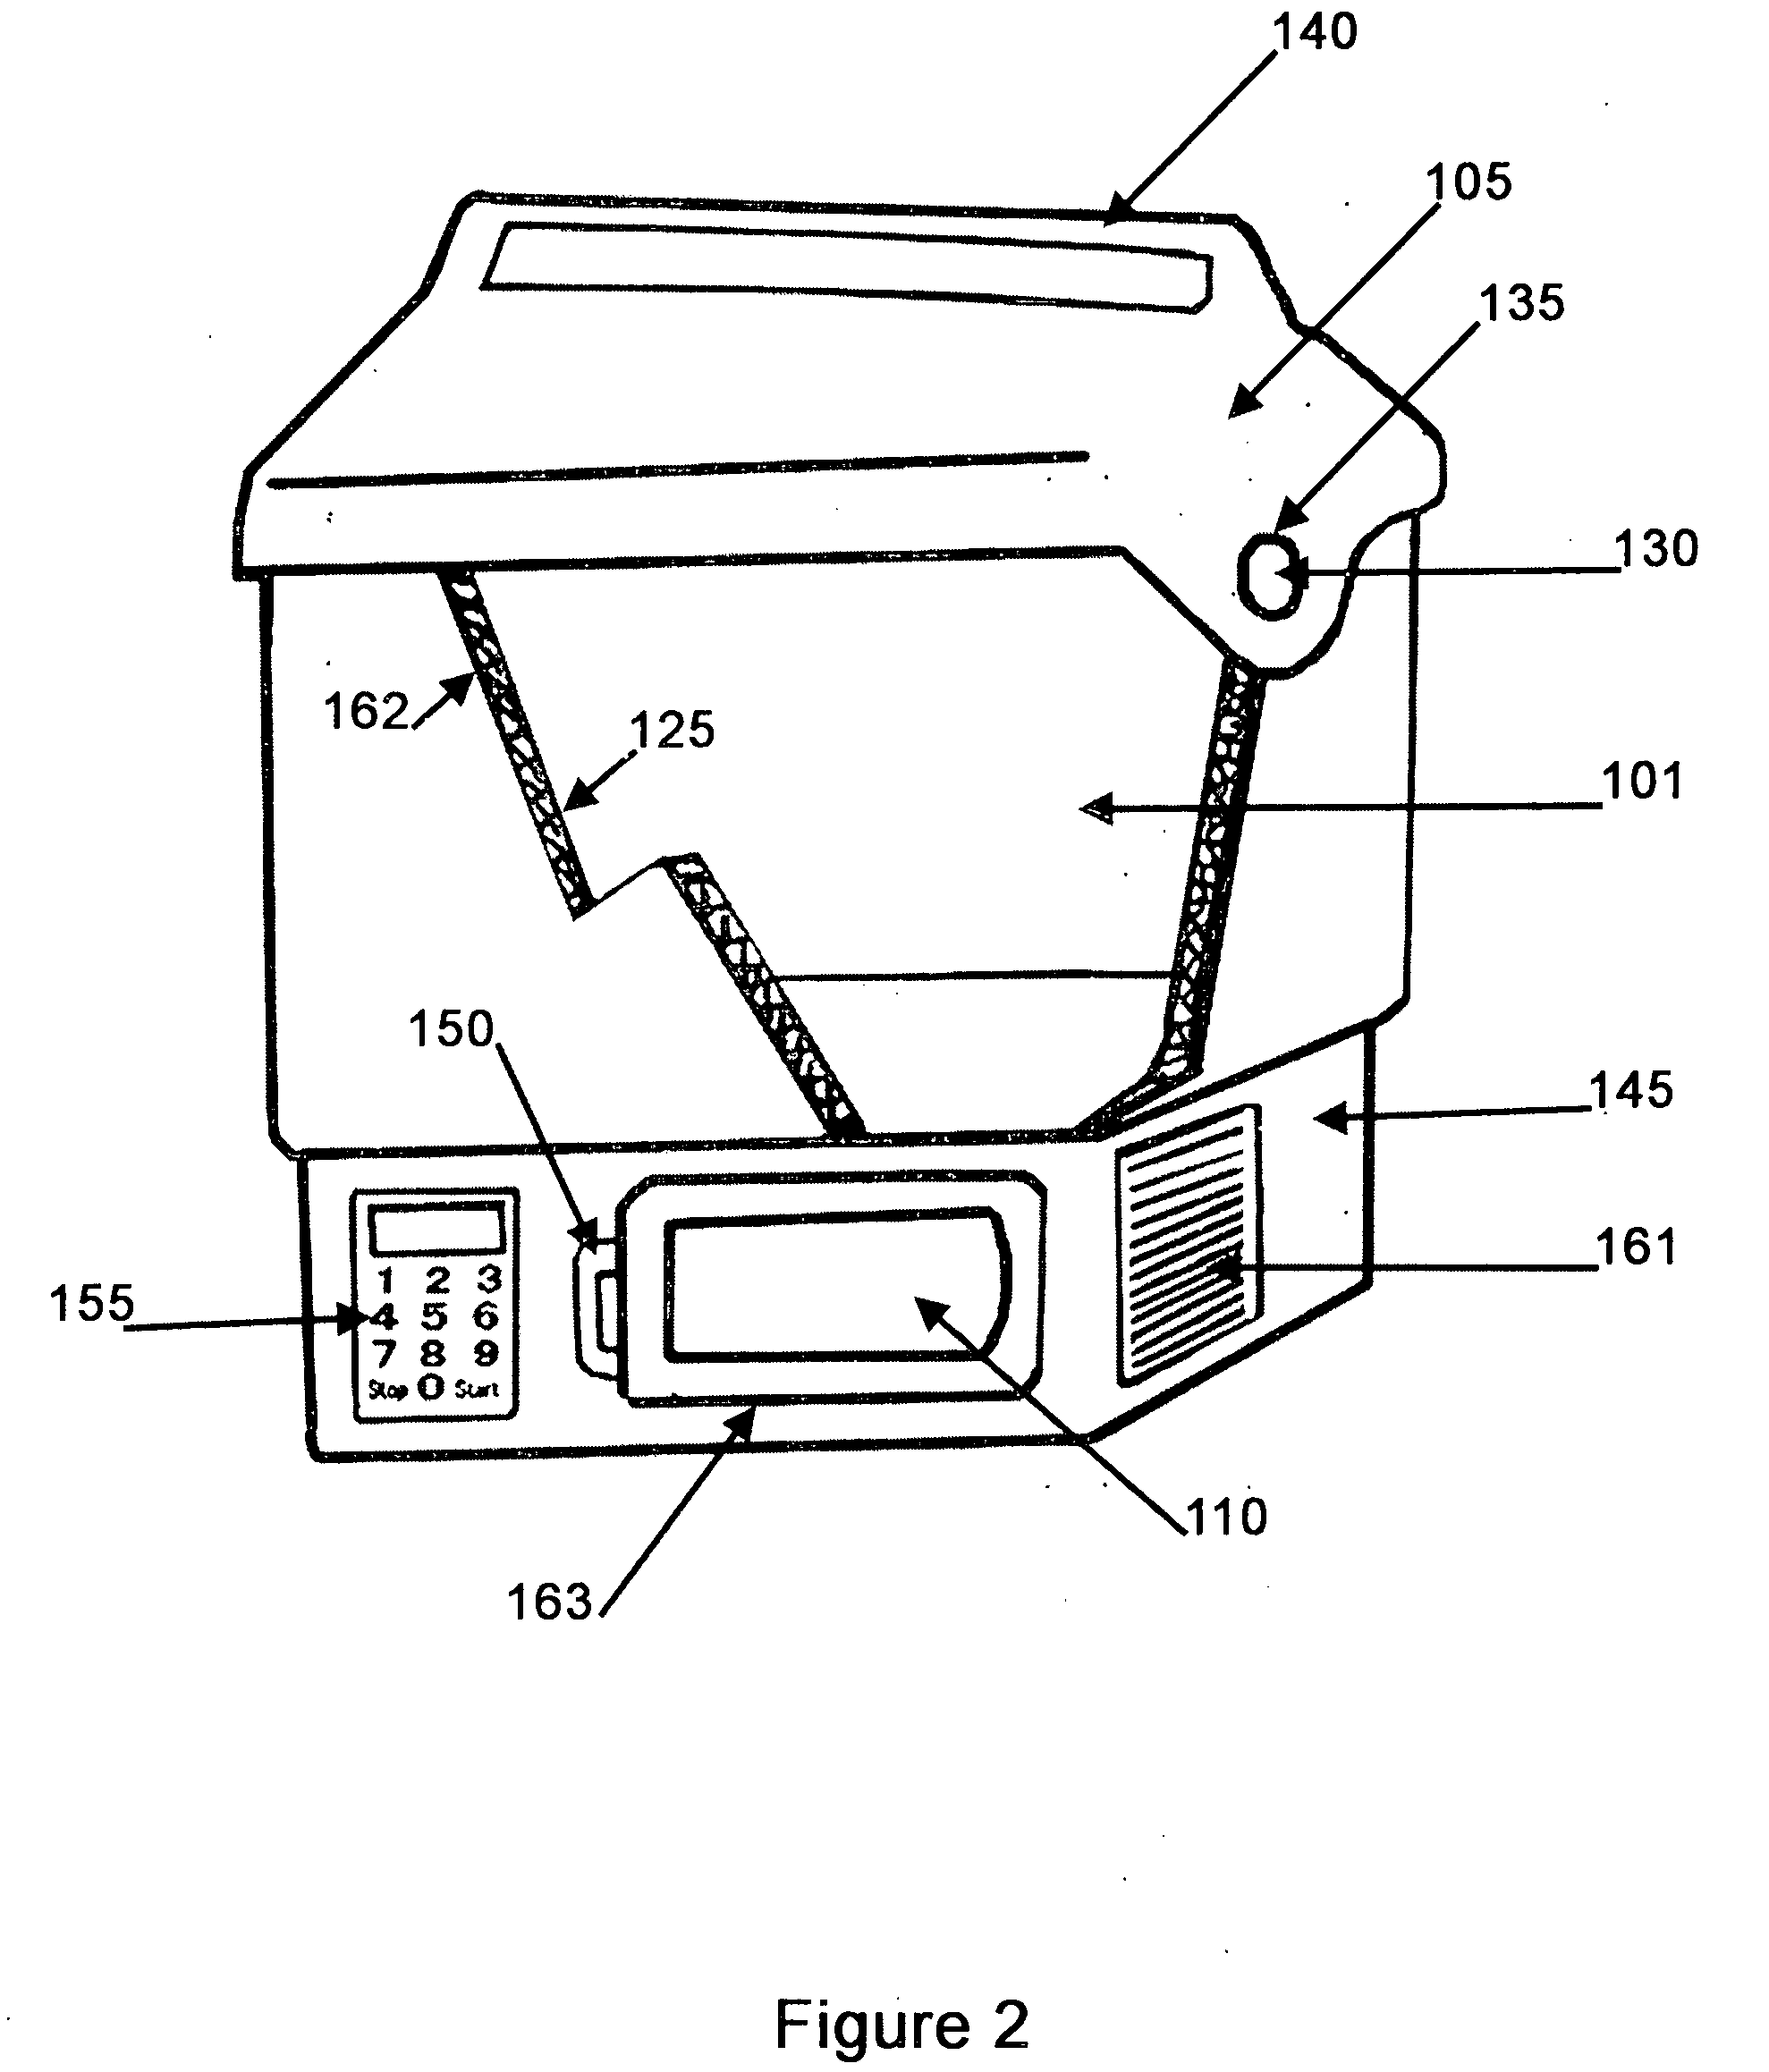 Portable food storage and preparation device